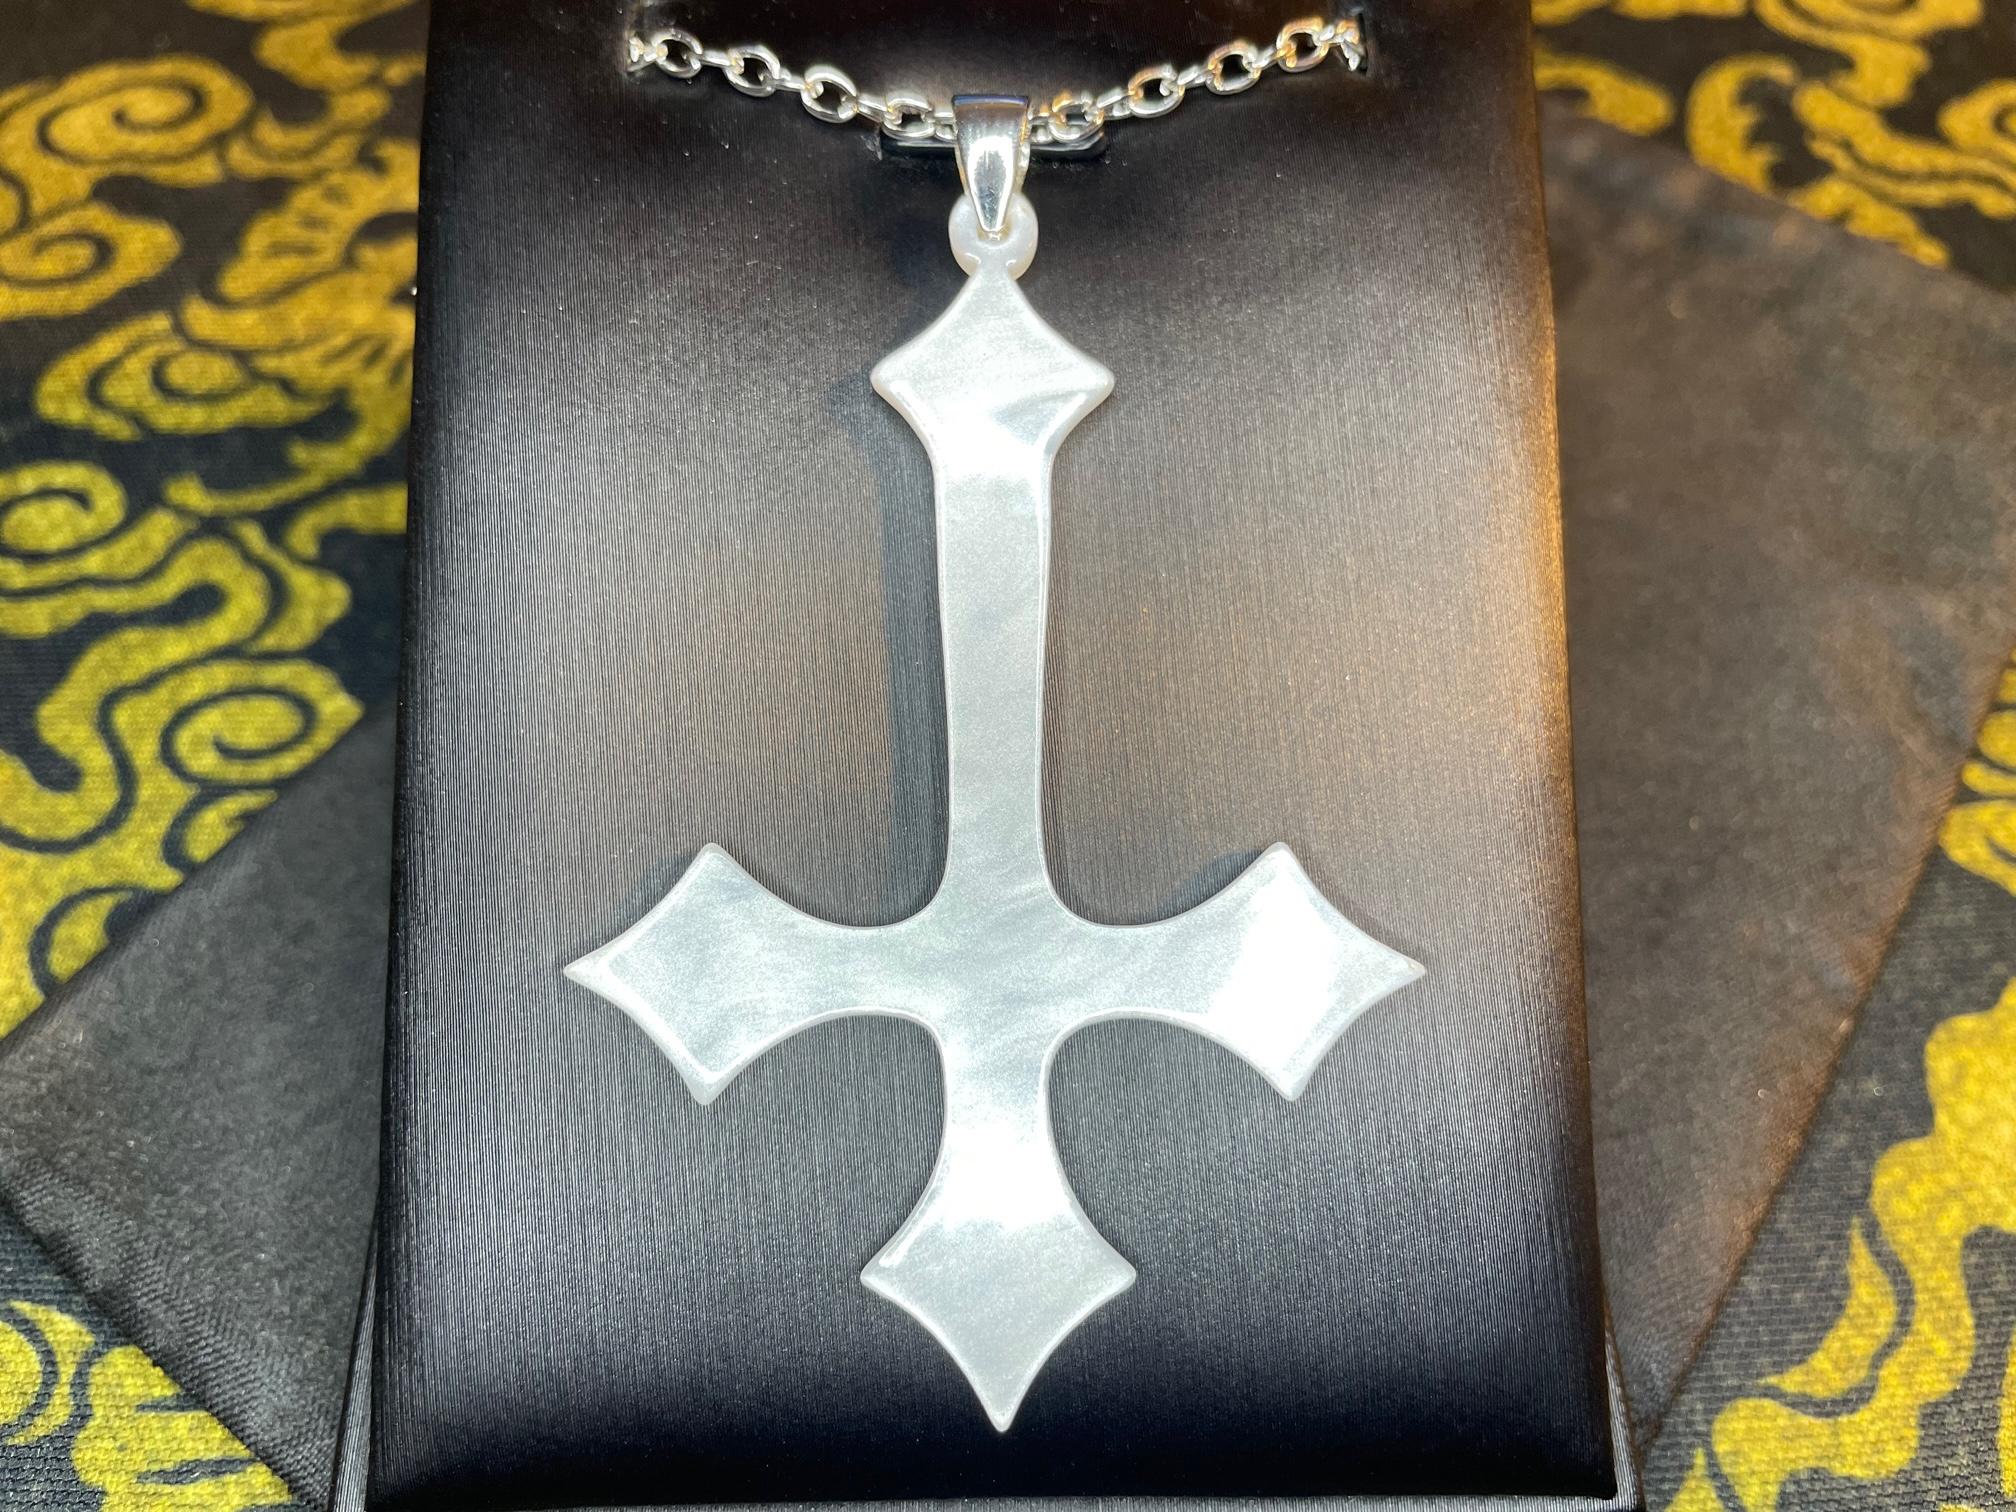 white swirled acrylic inverted upside down cross pendant necklace vintage gothic satanic wiccan occult darkness jewelry